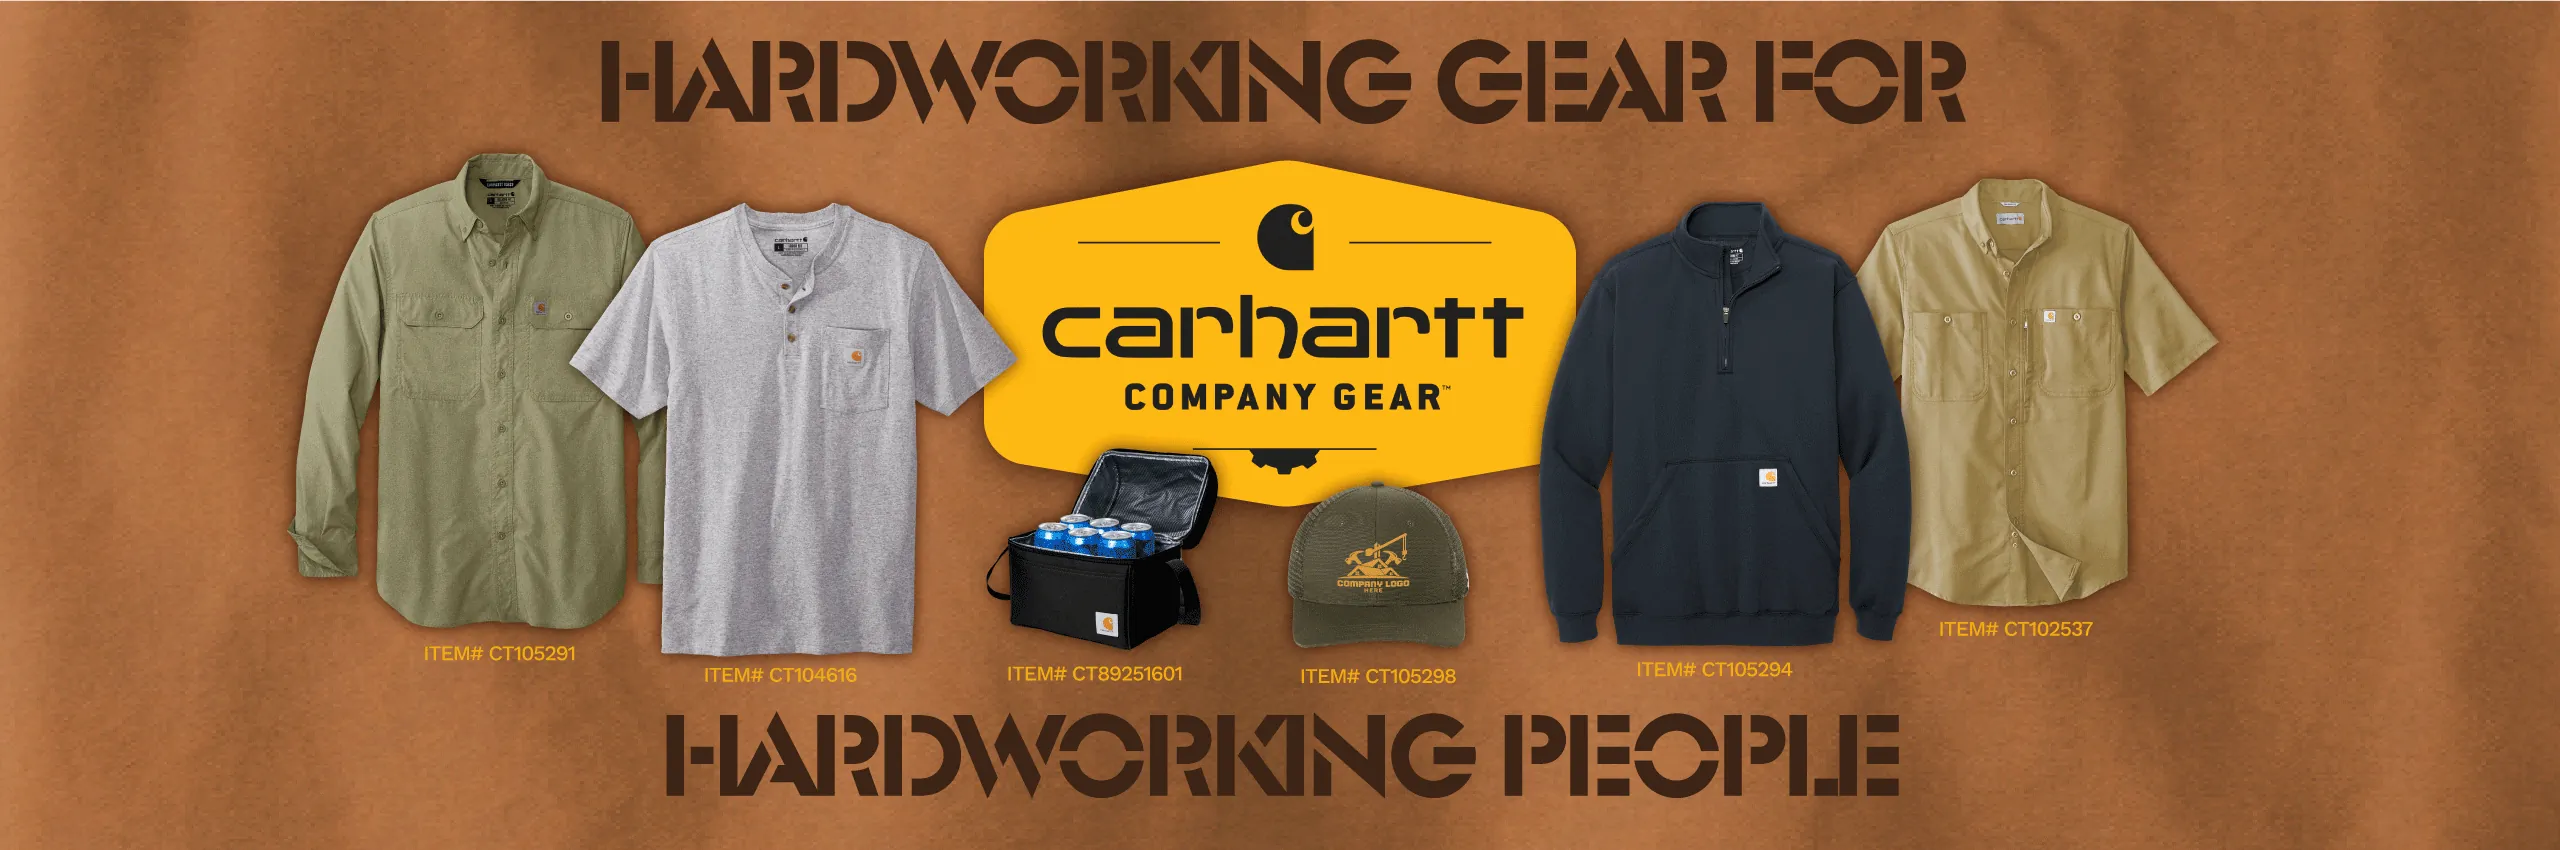 We stock the highest quality Carhartt for you and your team